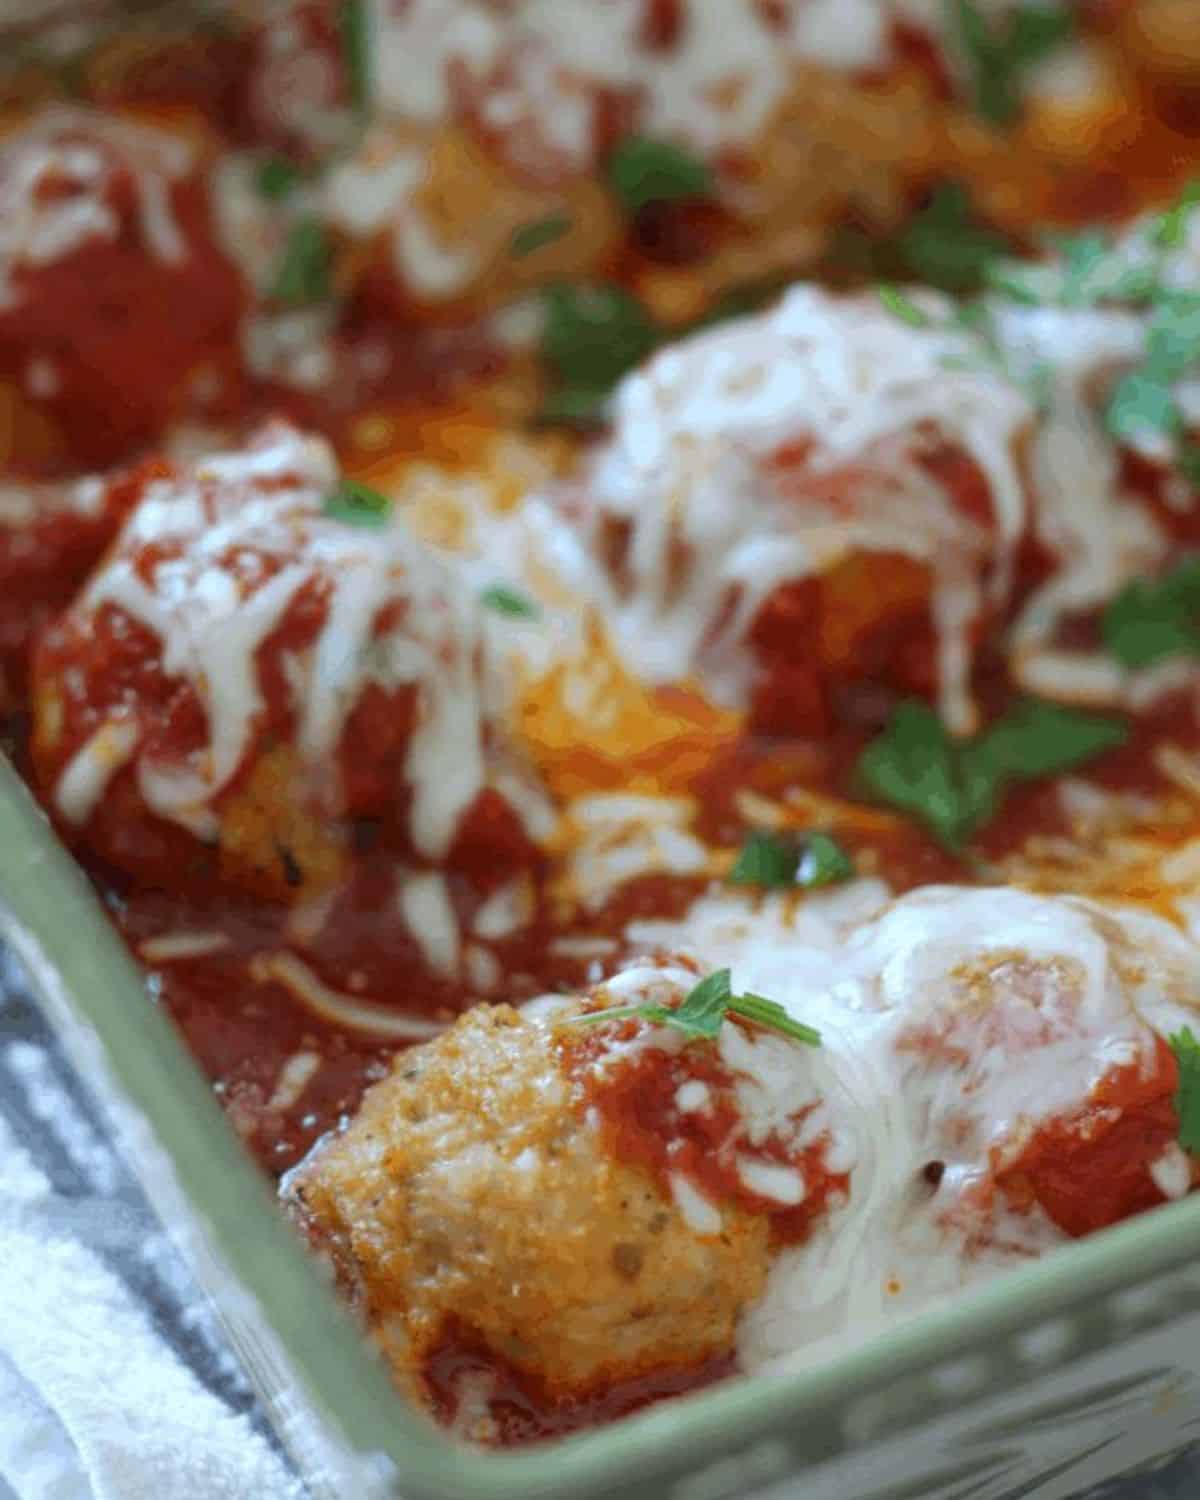 mozzarella cheese melted on the meatballs with herbs.